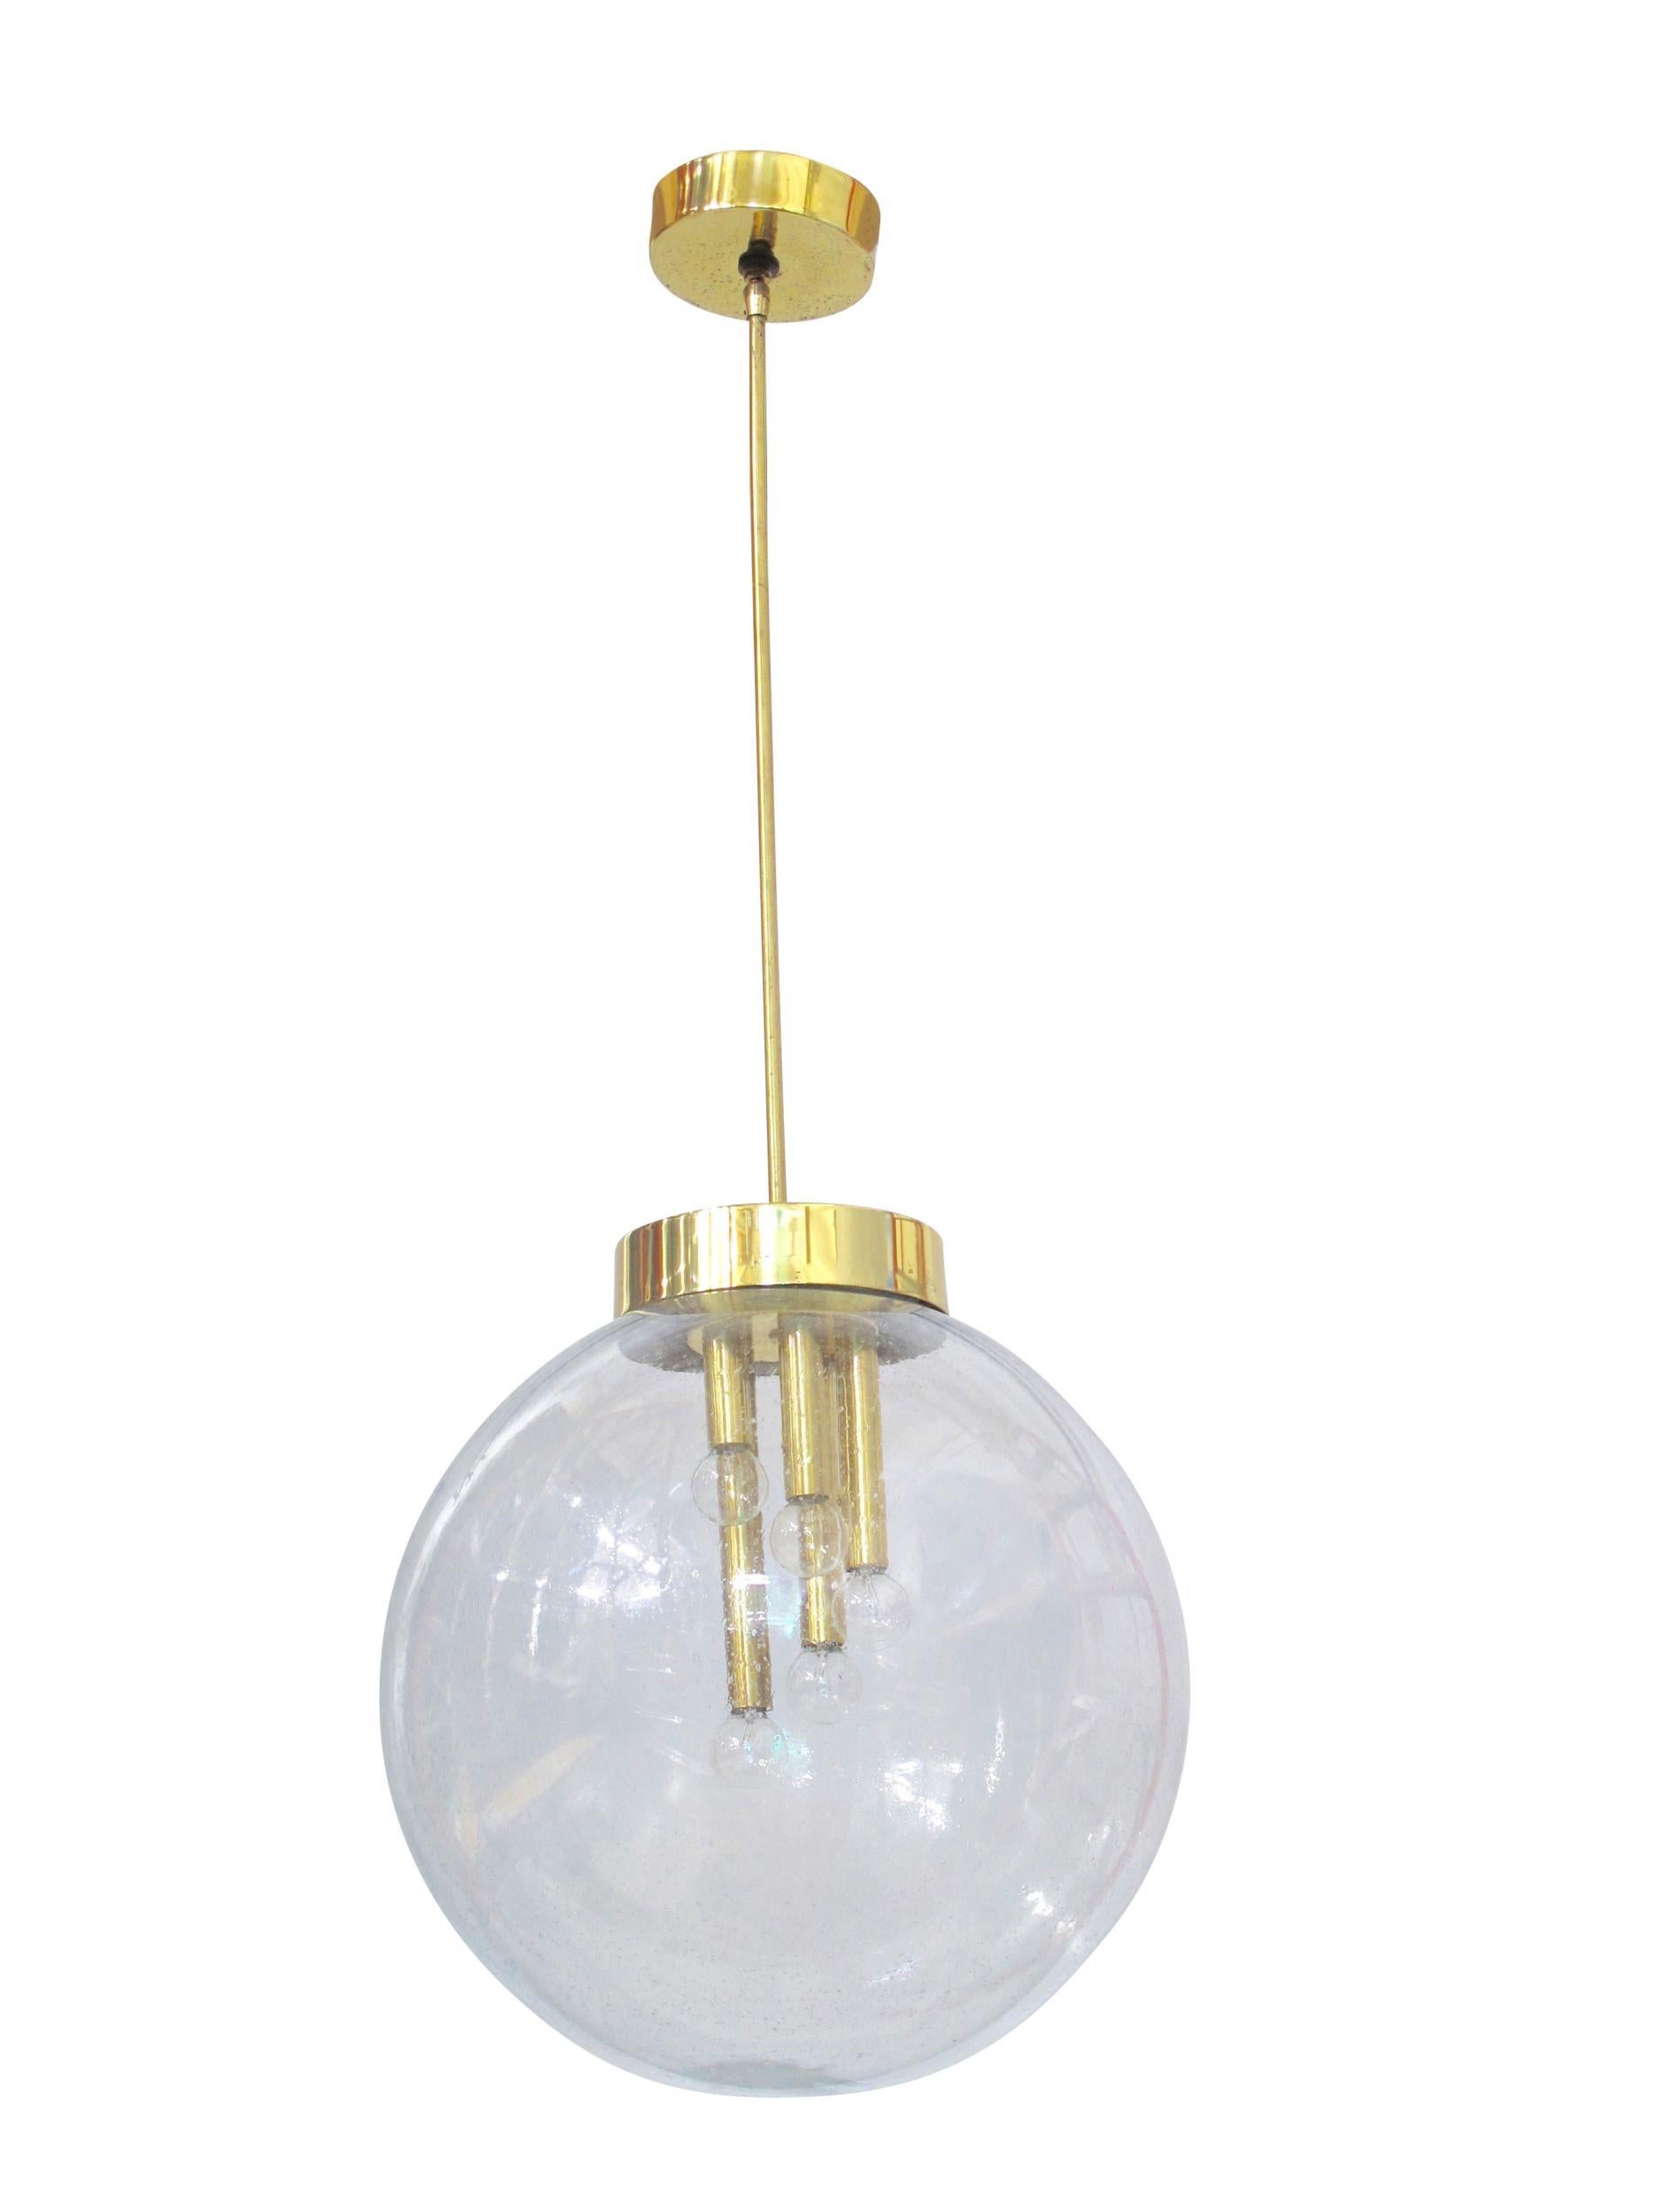 Mid Century Italian glass pendant chandeliers crafted of hand-blown Pulegoso glass with five lights per unit, suspended on brass stem and canopy. 15